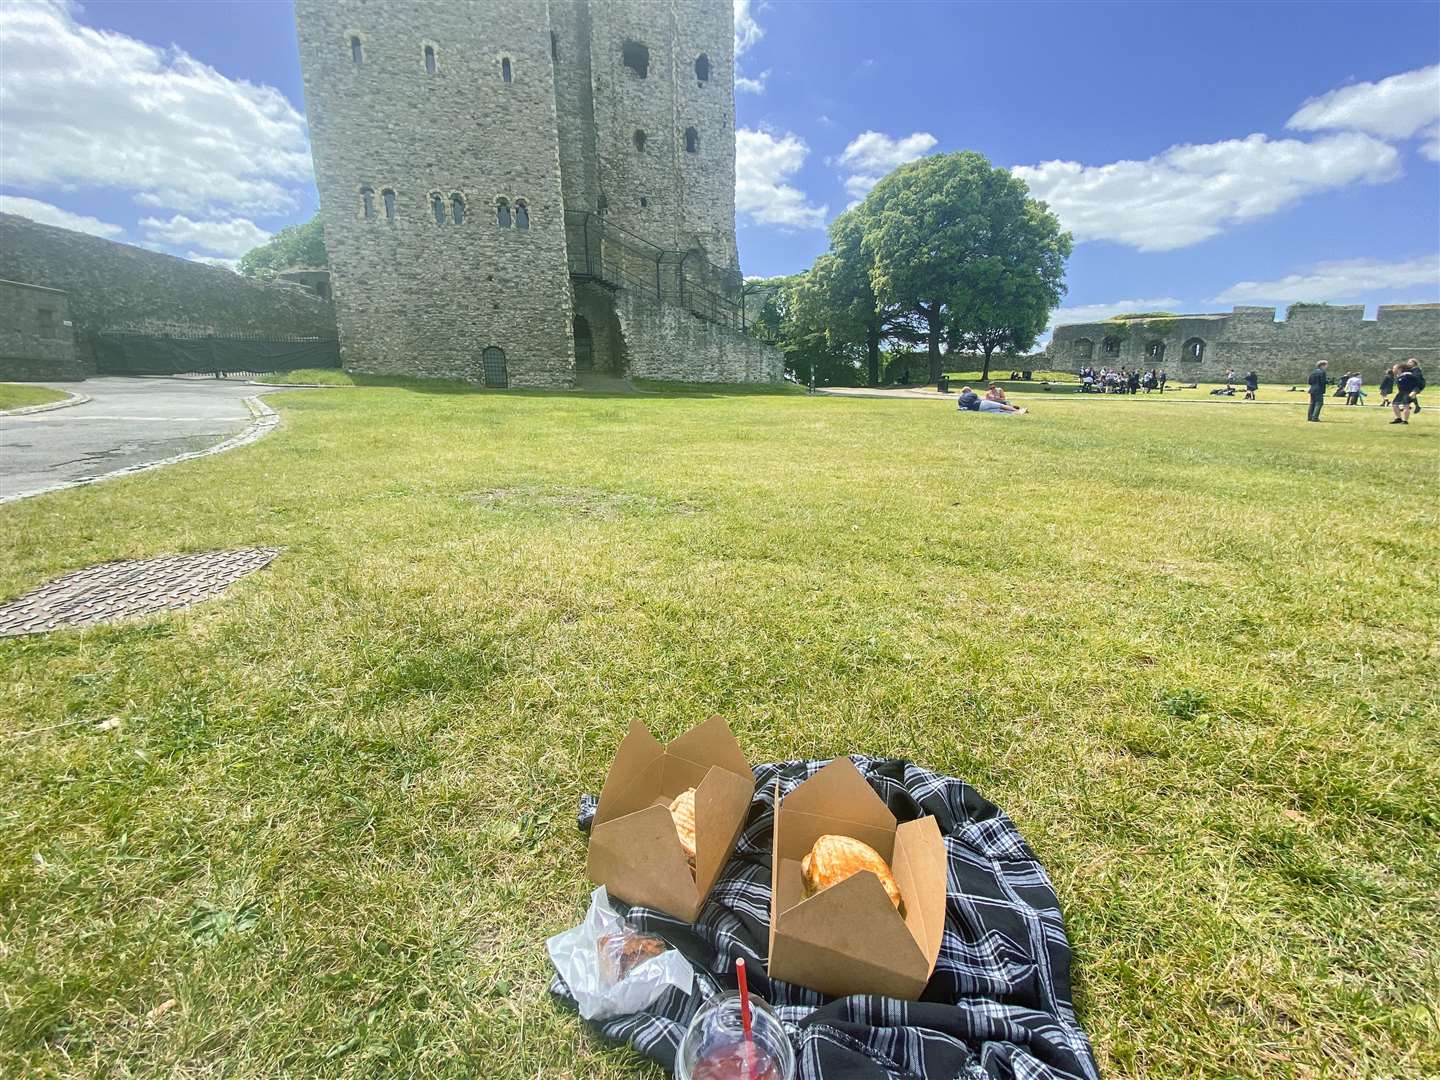 Lunch with a view in the grounds of Rochester Castle. Picture: Sam Lawrie